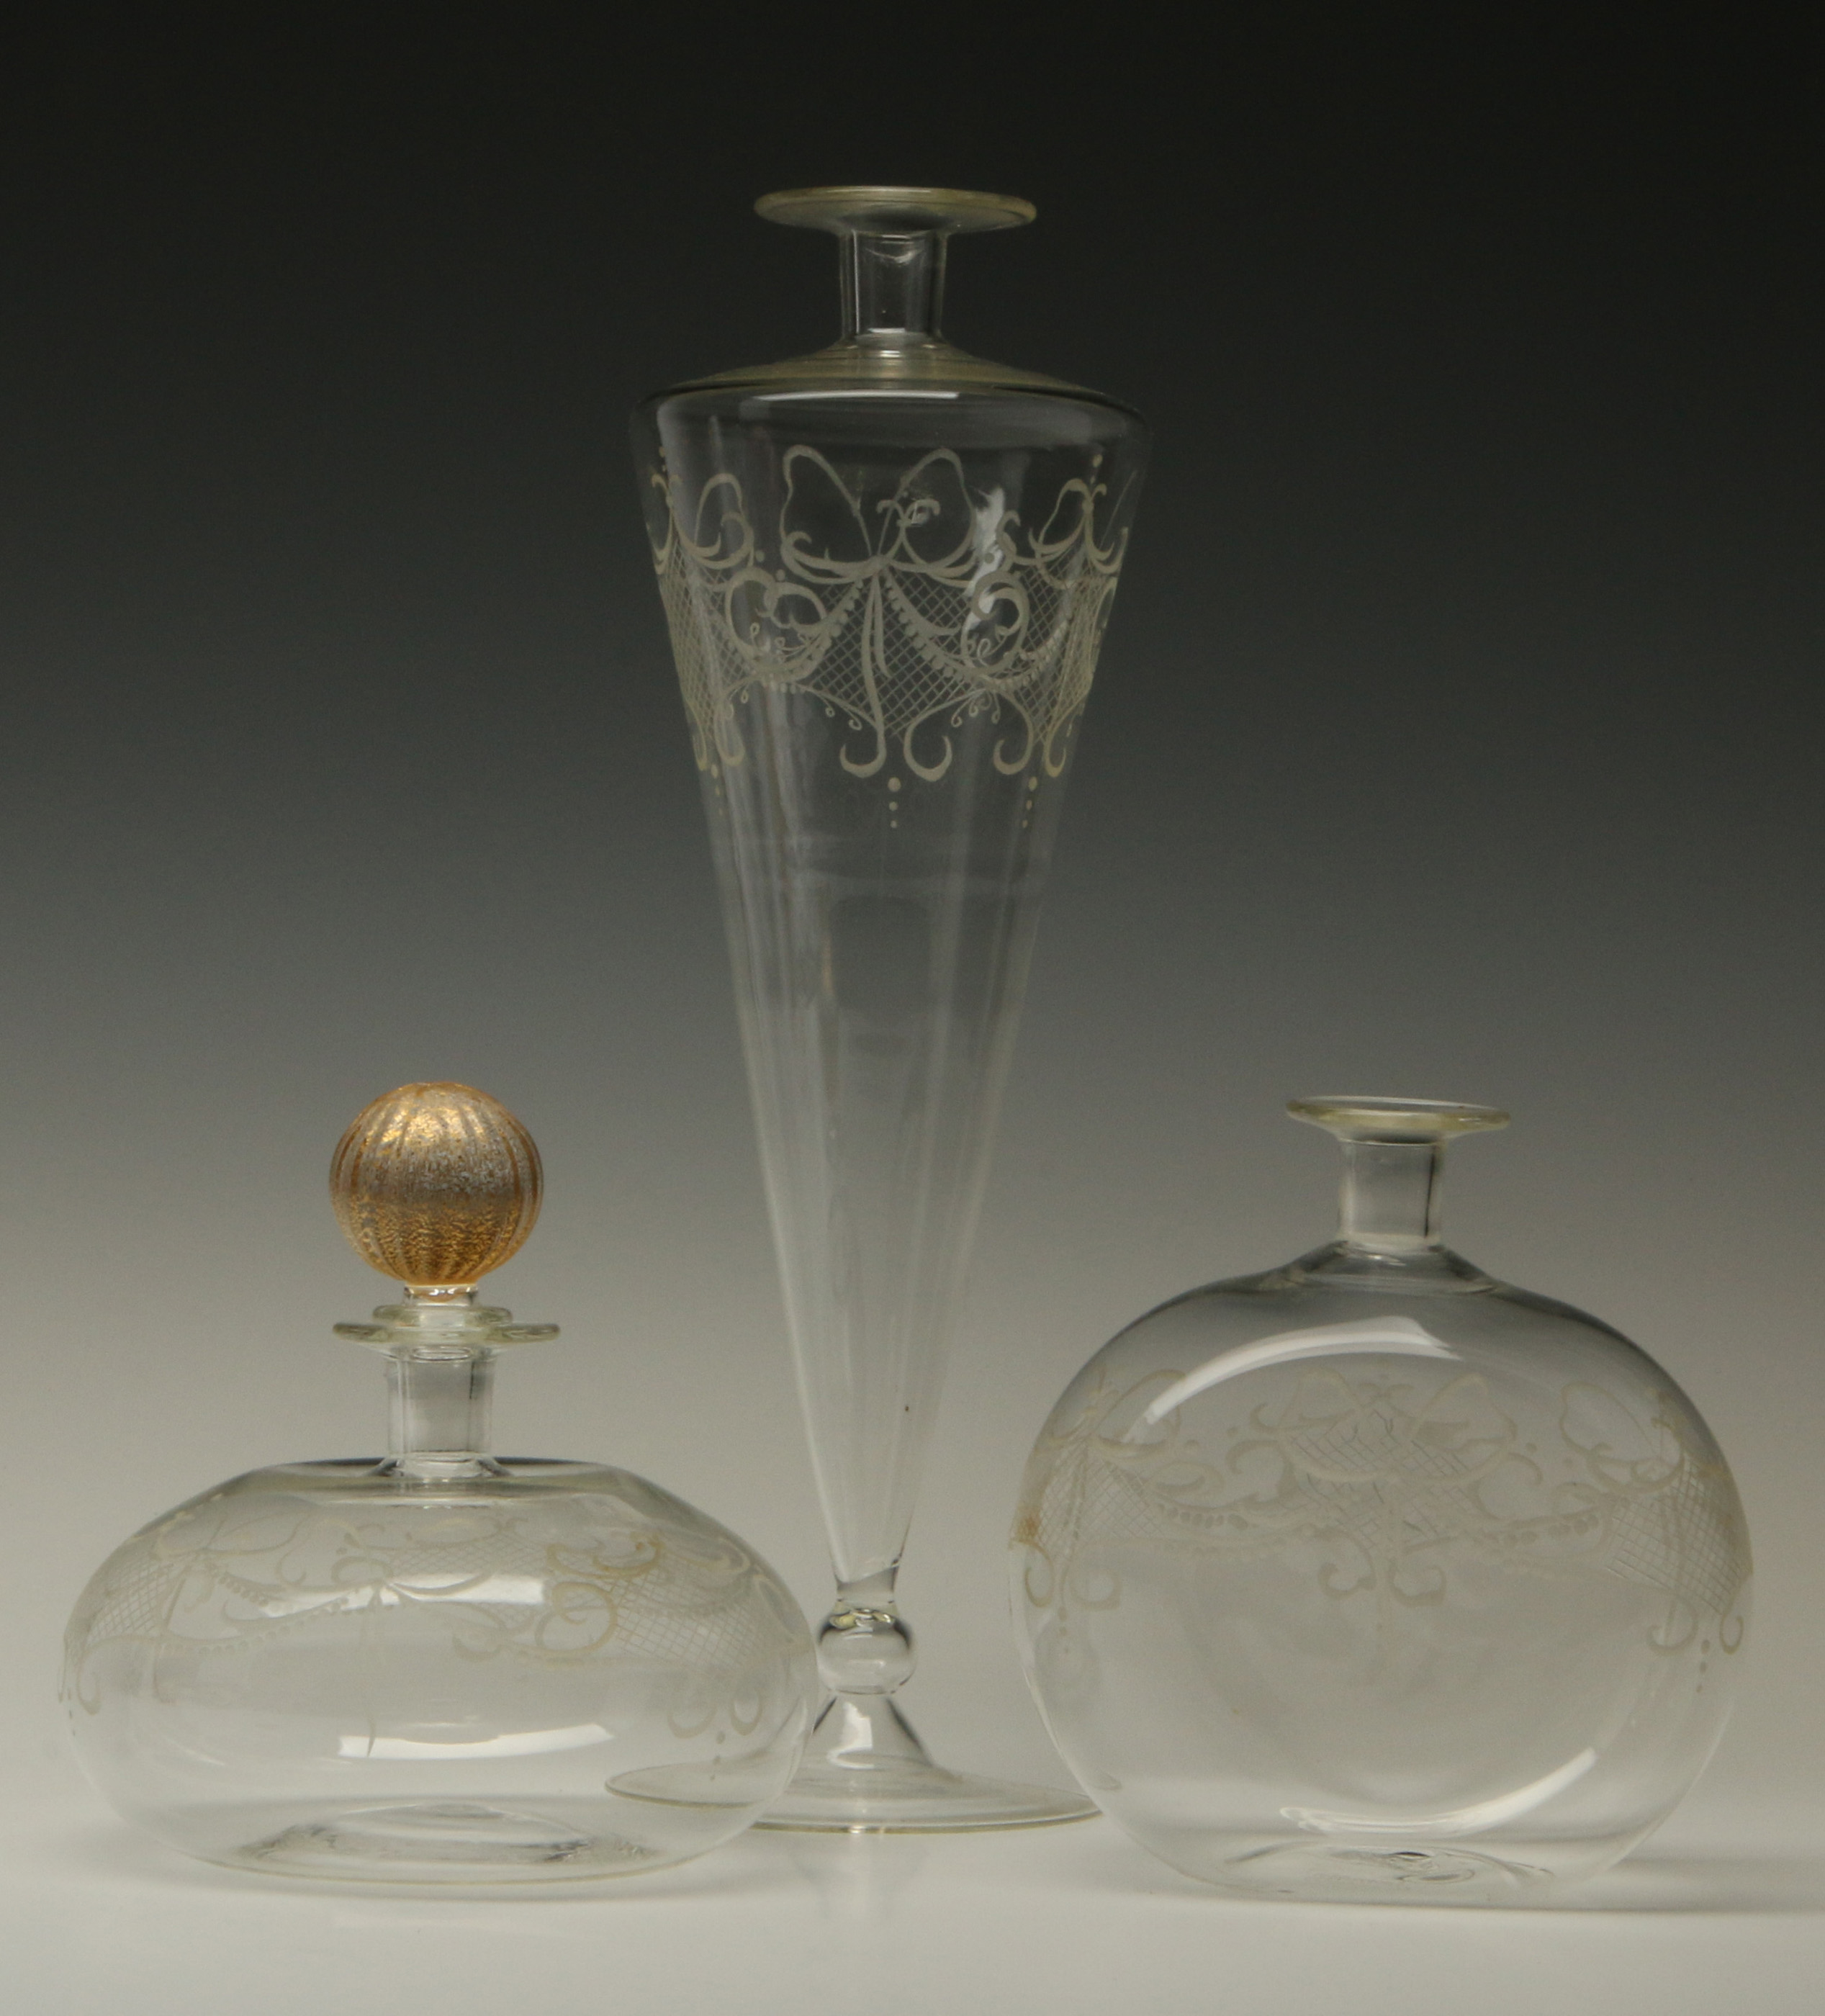 20TH CENTURY PAPER-THIN BLOWN GLASS ARTICLES